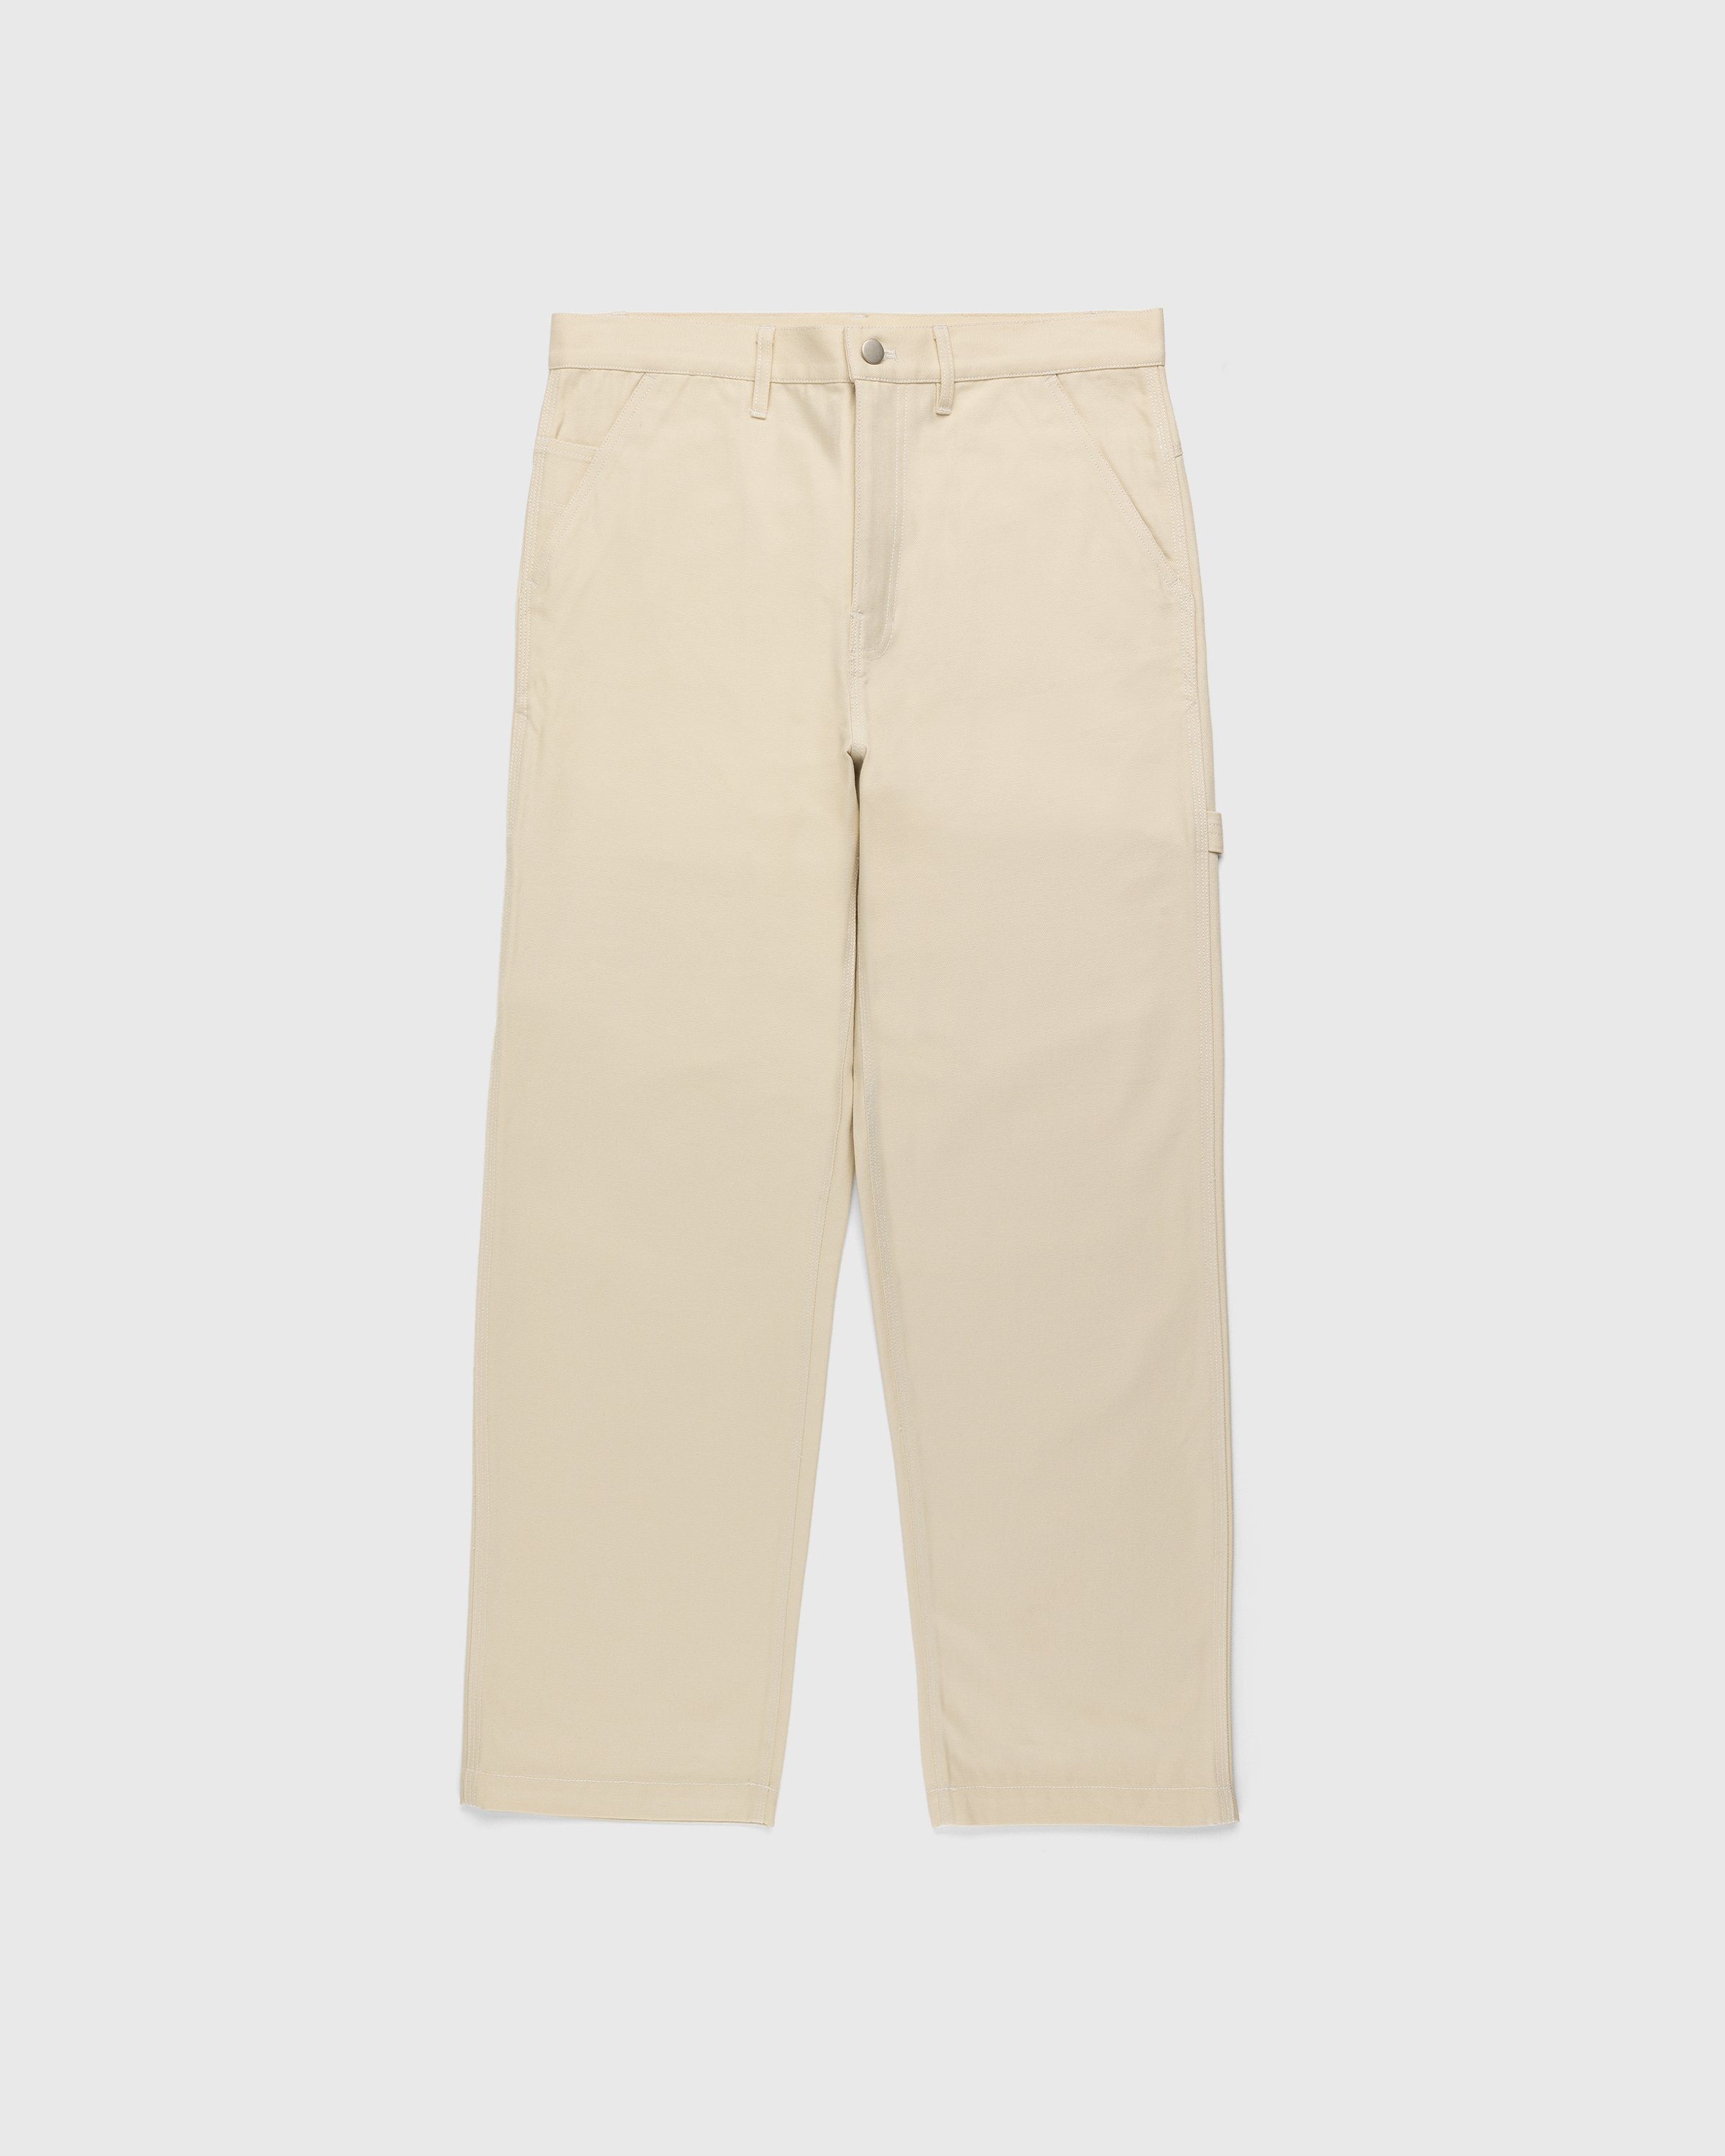 RUF x Highsnobiety - Cotton Work Pants Natural - Clothing - Beige - Image 2